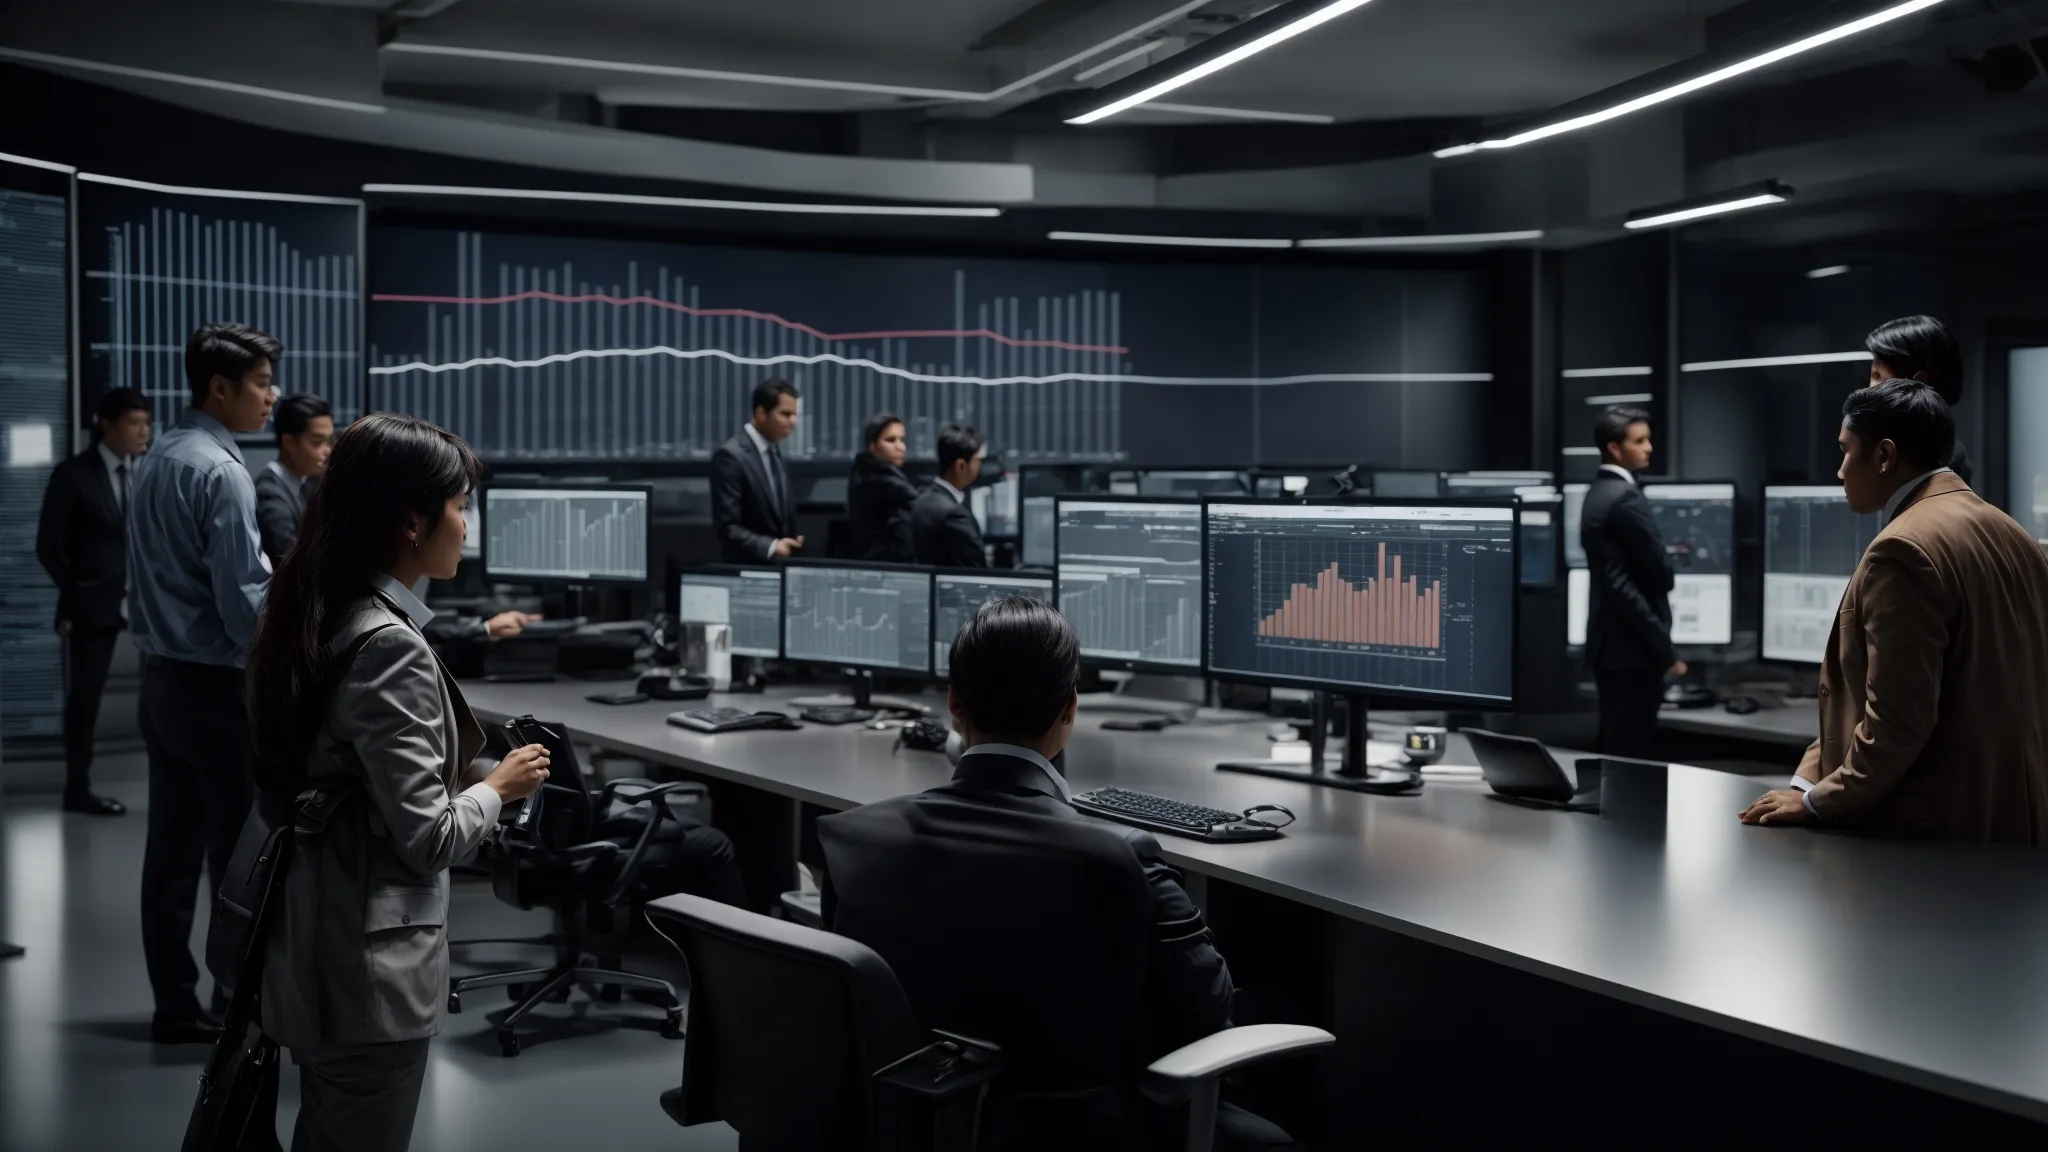 a diverse group of professionals examines data charts on large monitors in a modern office setting.